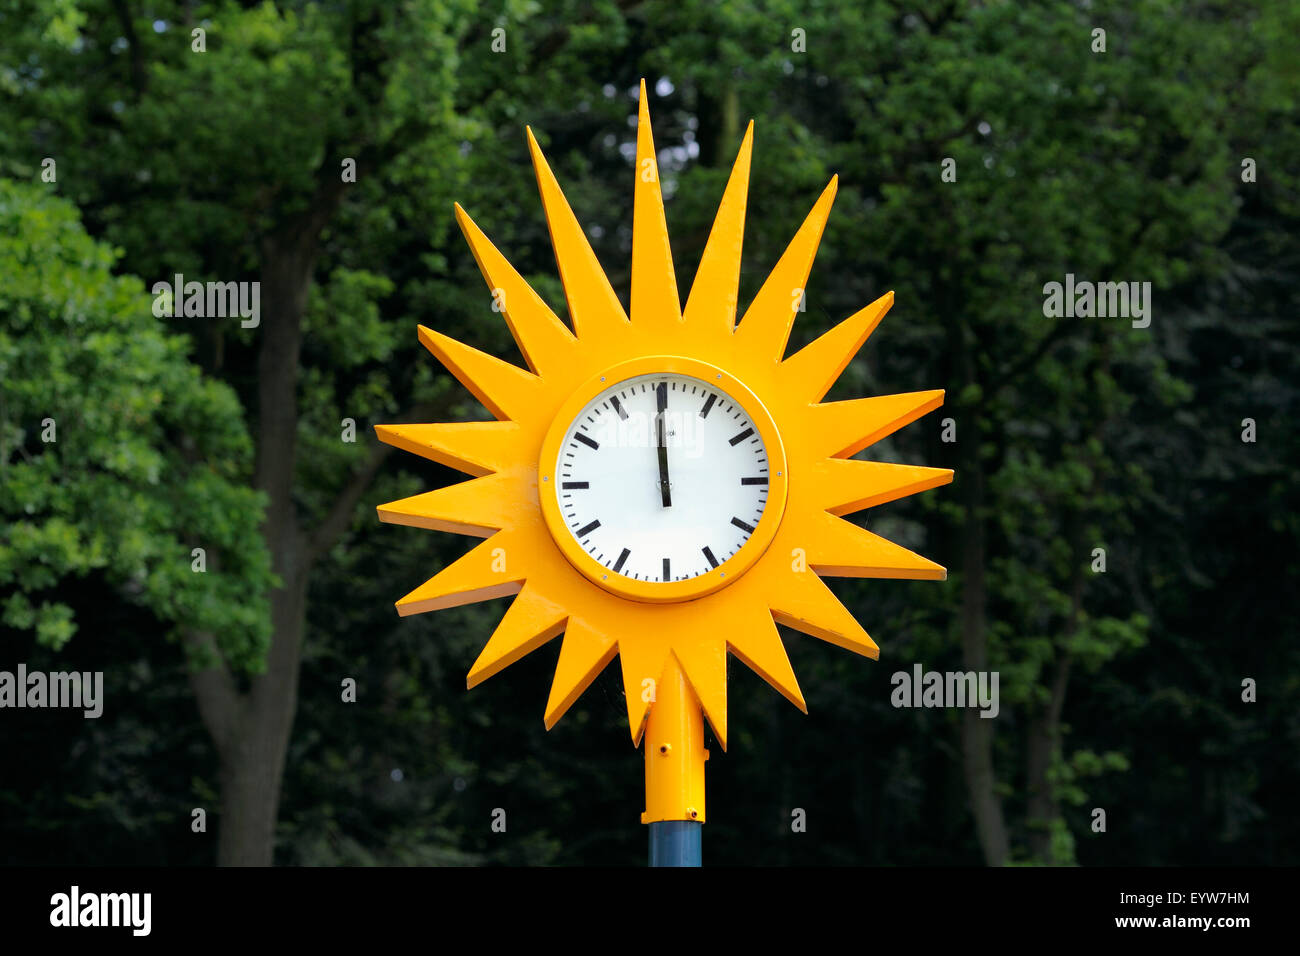 Clock designed to look like the sun, in the grounds of the Zonnestraal heliotherapy sanatorium, Hilversum, The Netherlands. Stock Photo